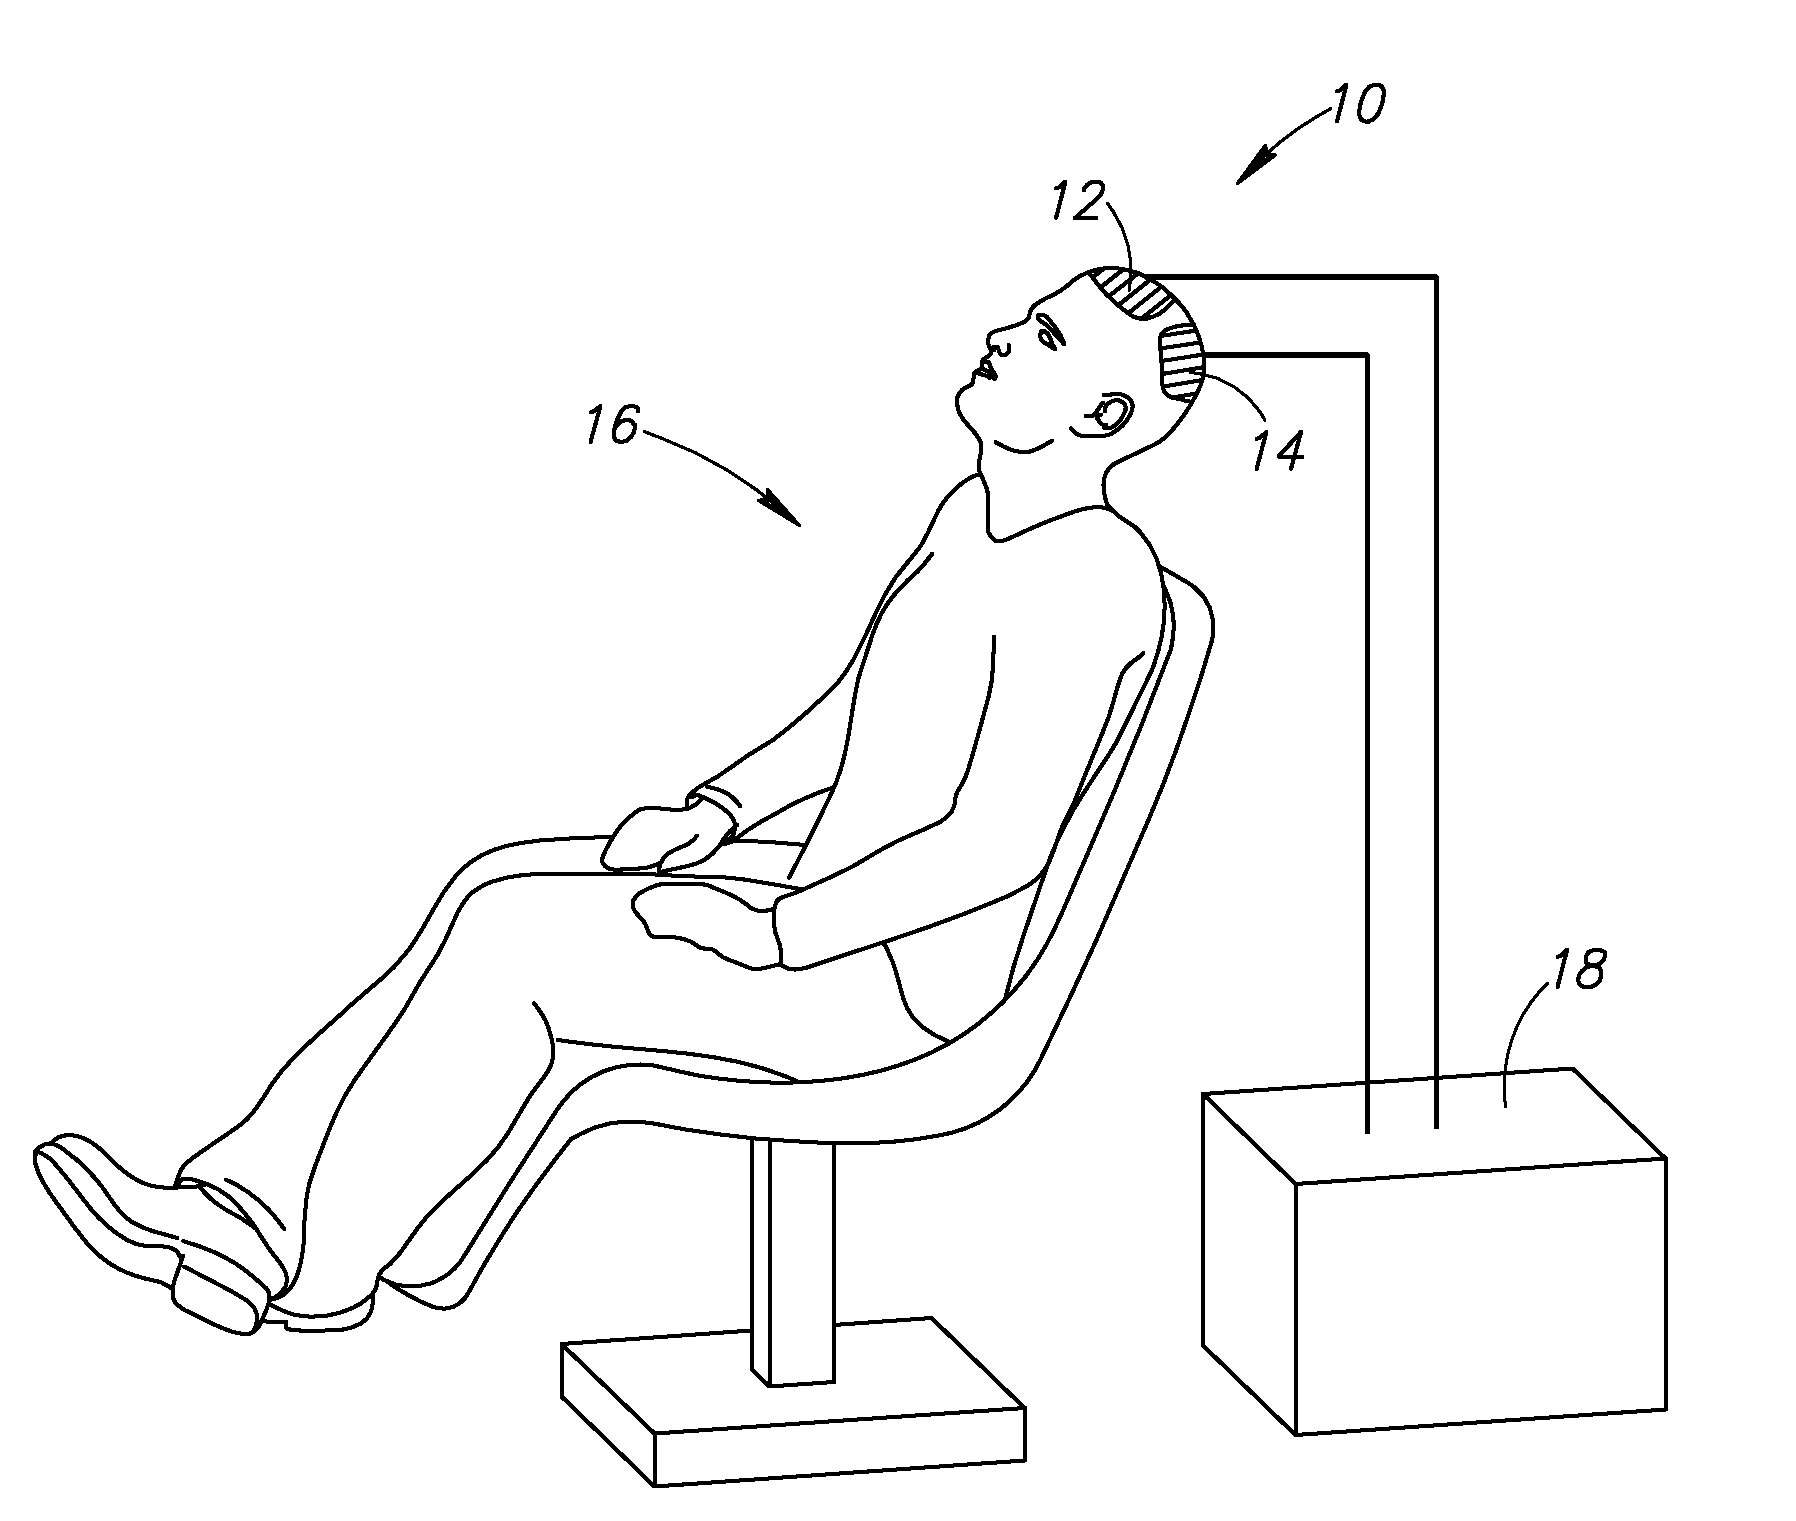 Systems and methods for controlling electric field pulse parameters using transcranial magnetic stimulation